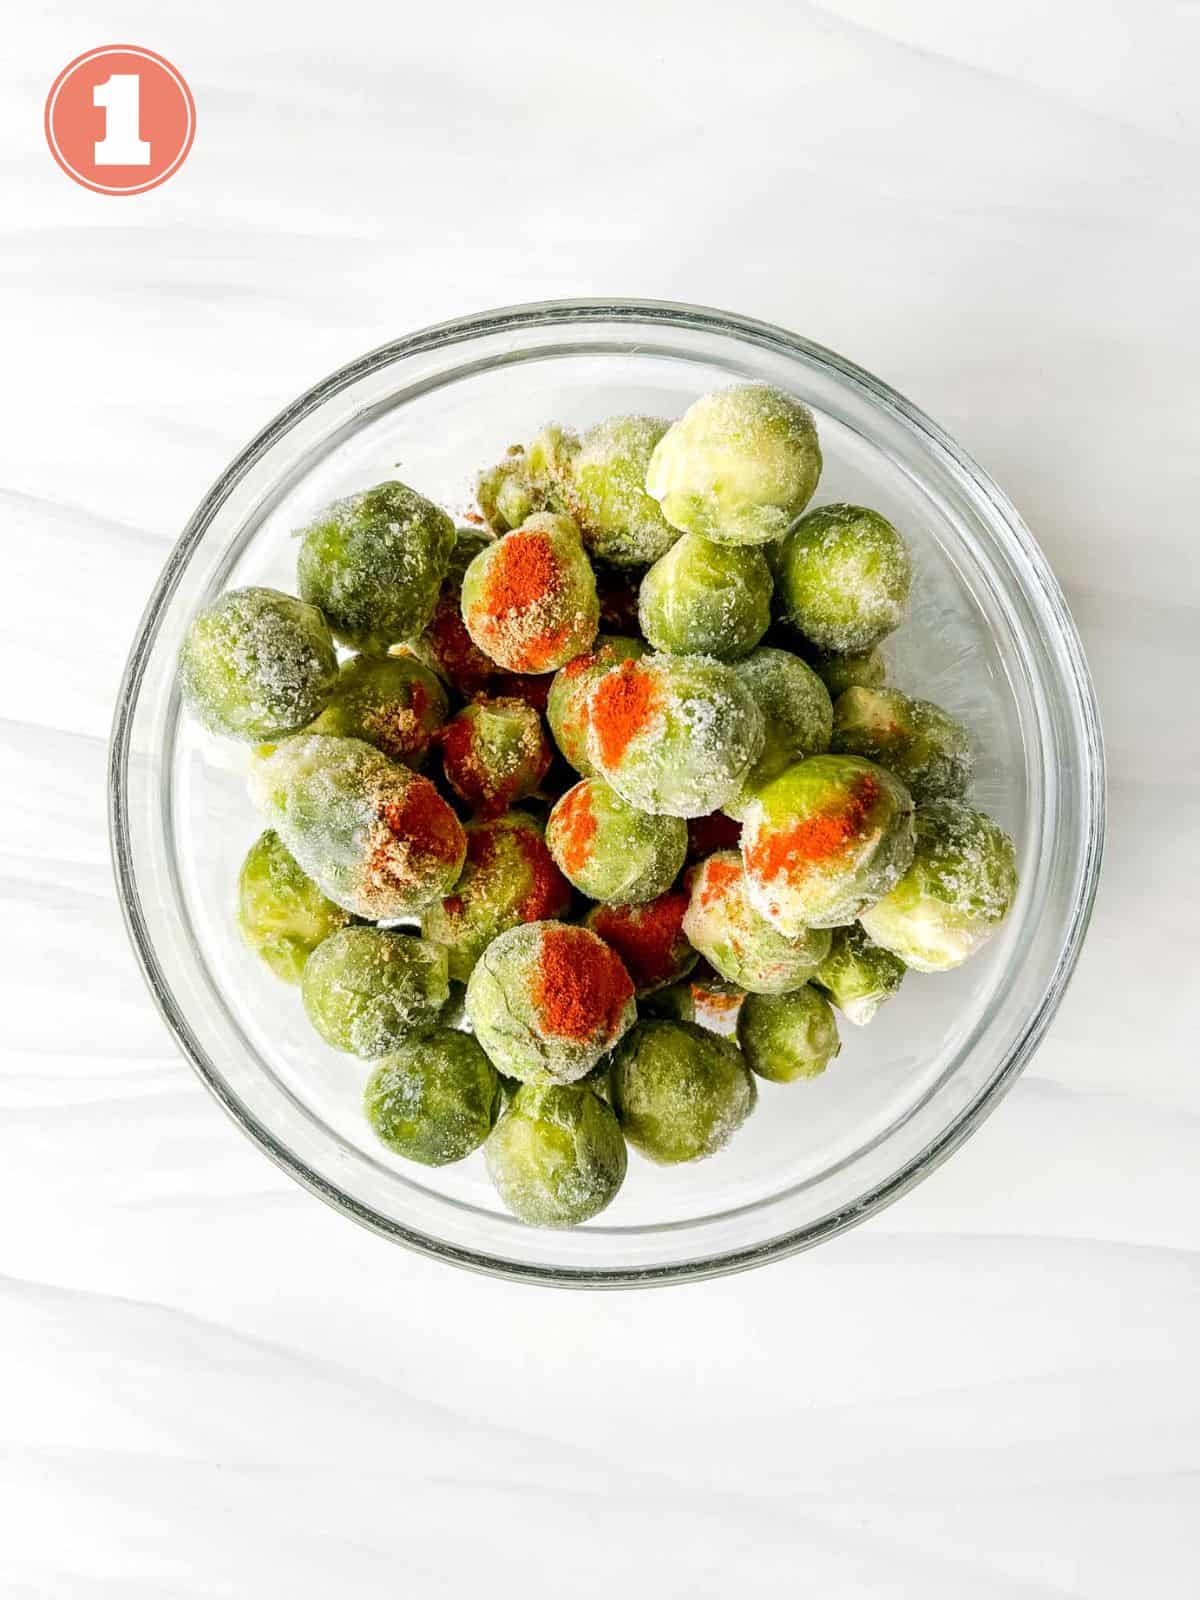 frozen Brussels sprouts with paprika sprinkled on them in a glass bowl labelled number one.